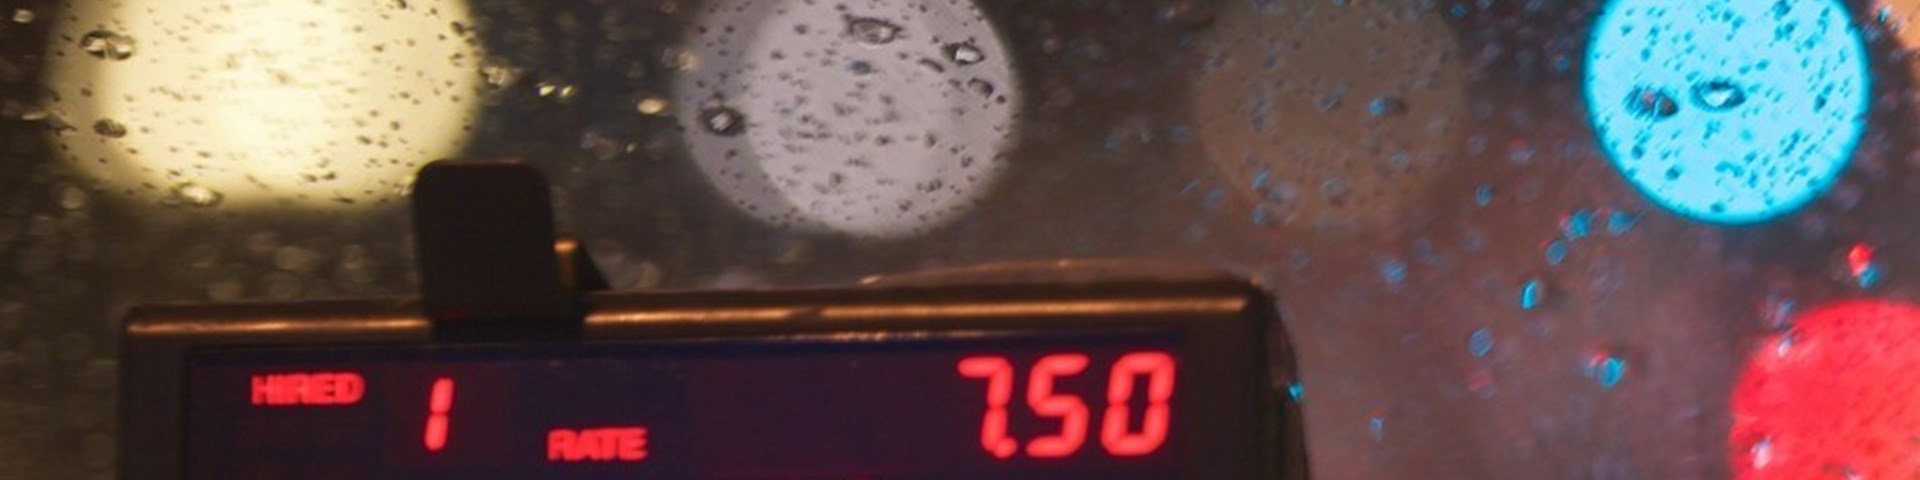 Taxi Meter inside cab showing passenger how much the fare will be